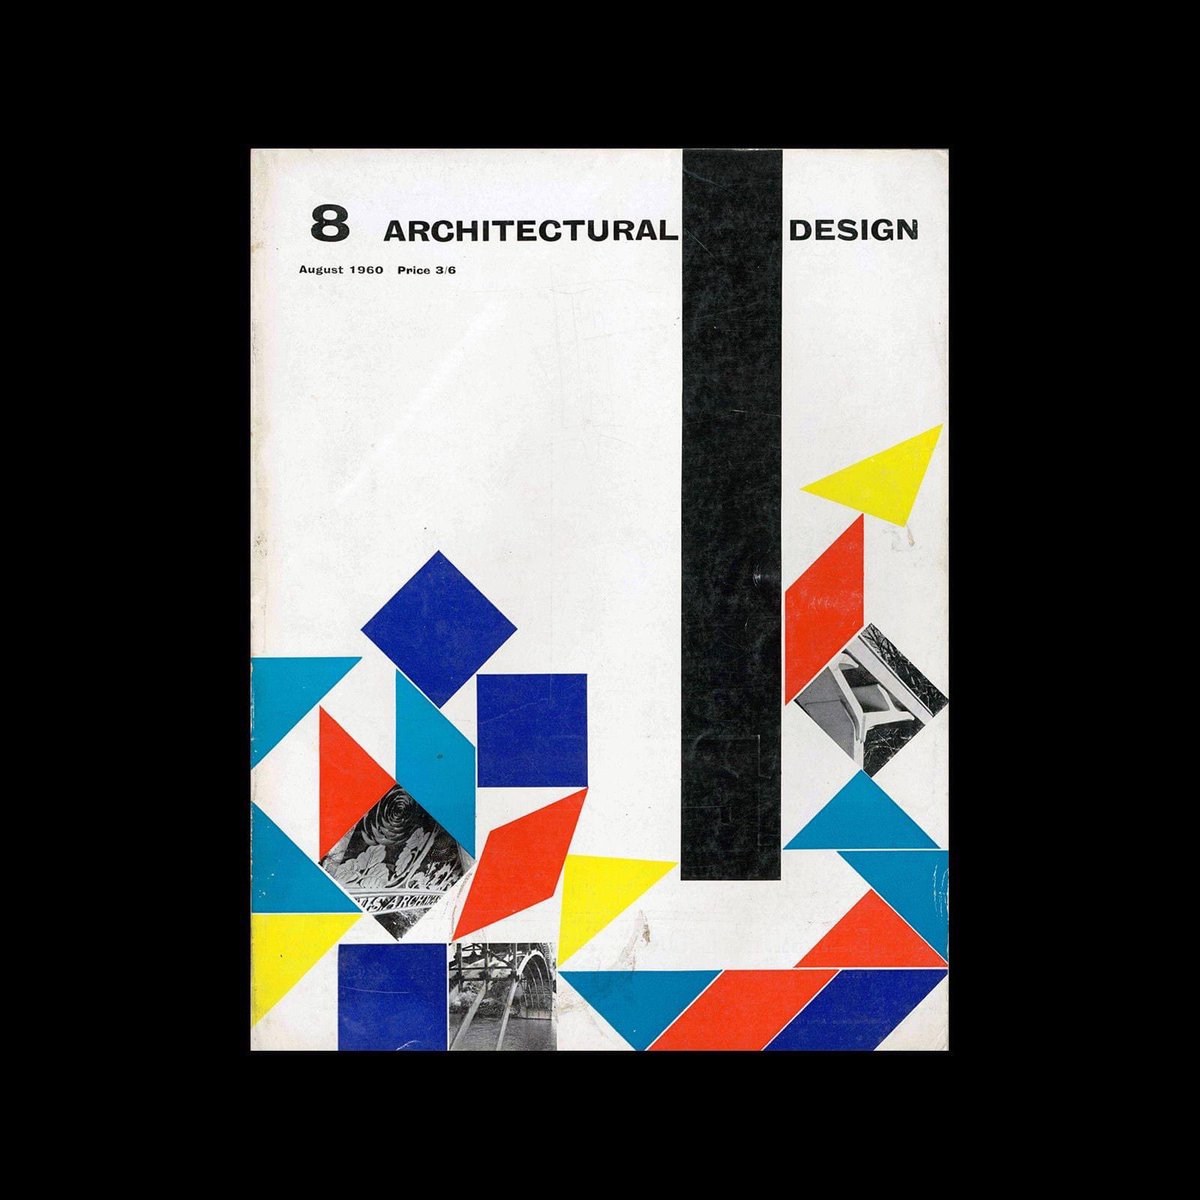 Architectural Design, August 1960
The cover, designed by Theo Crosby, is based on the transformable construction by Mari
designreviewed.com/artefacts/arch…
#theocrosby #architecturaldesign #mari